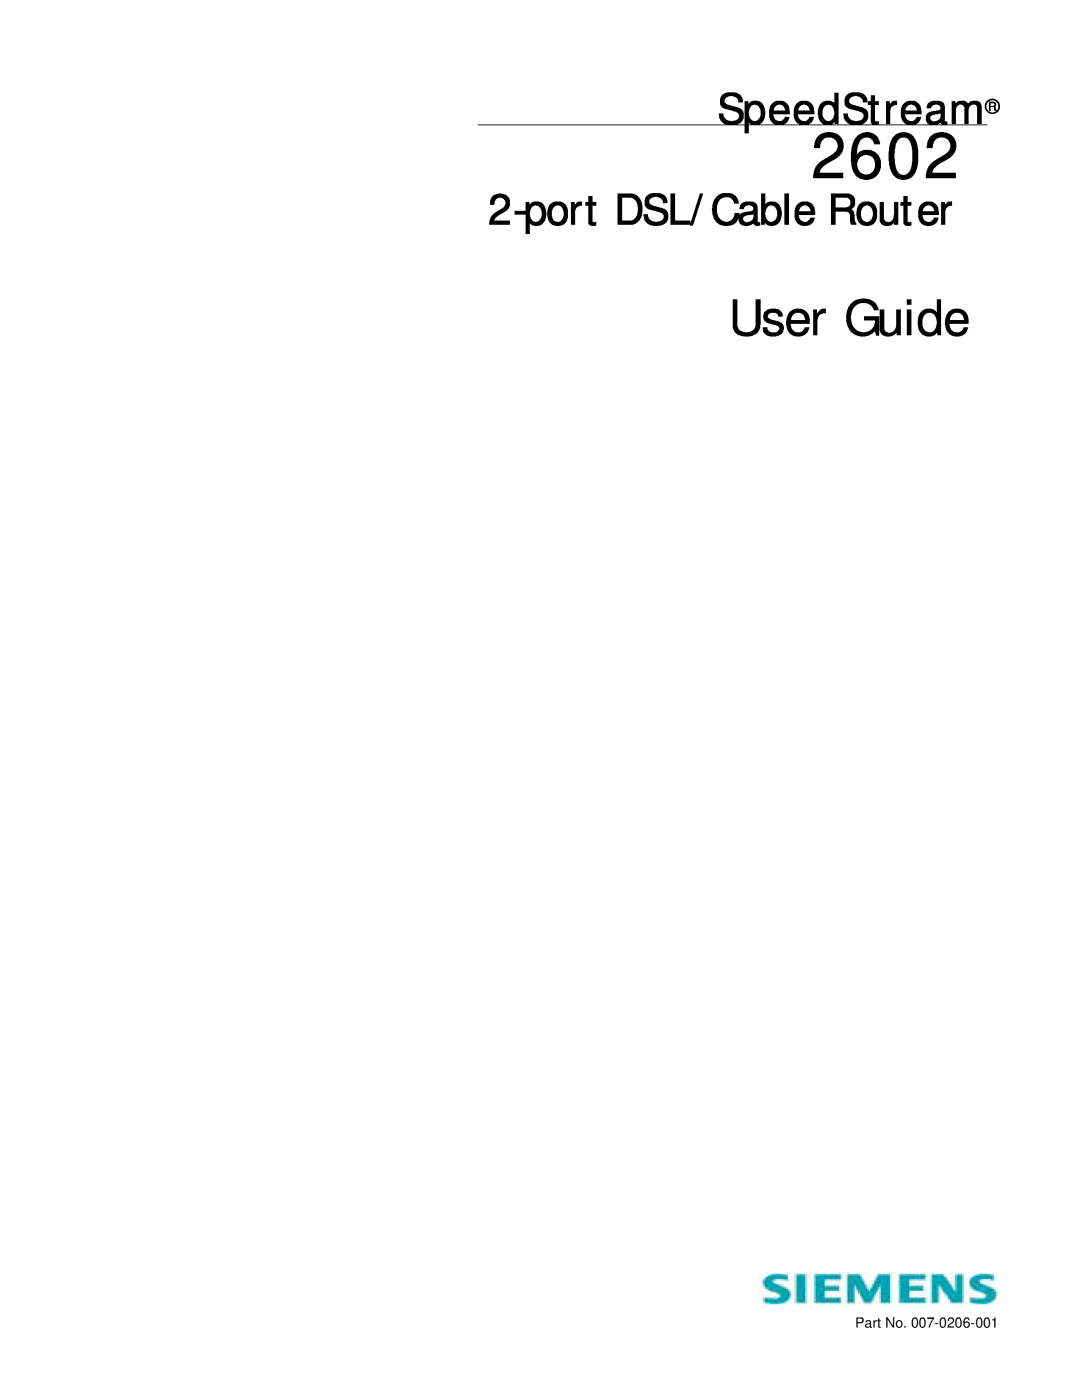 Siemens 2602 manual User Guide, SpeedStream, port DSL/Cable Router 